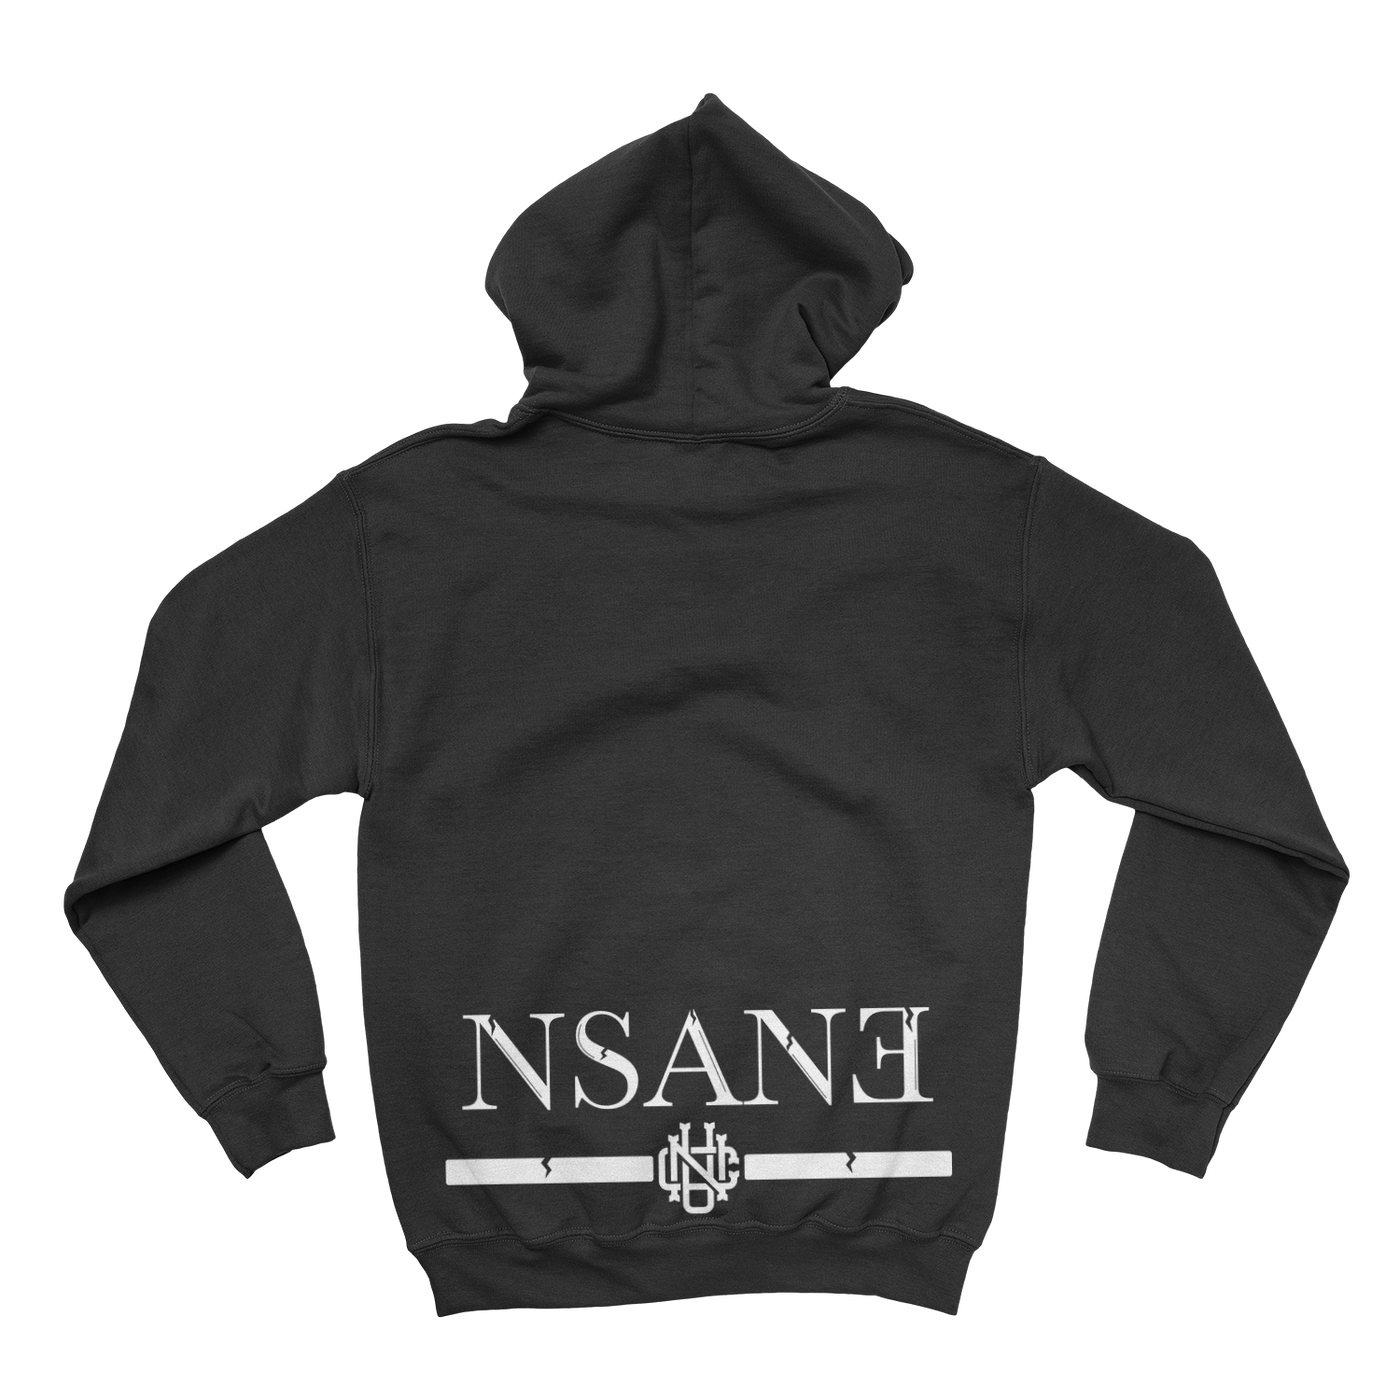 Nsane Signature Edition Hoodie - Unique Sweatsuits, hats, tees, shorts, hoodies, Outwear & accessories online | Uneekly Nsane